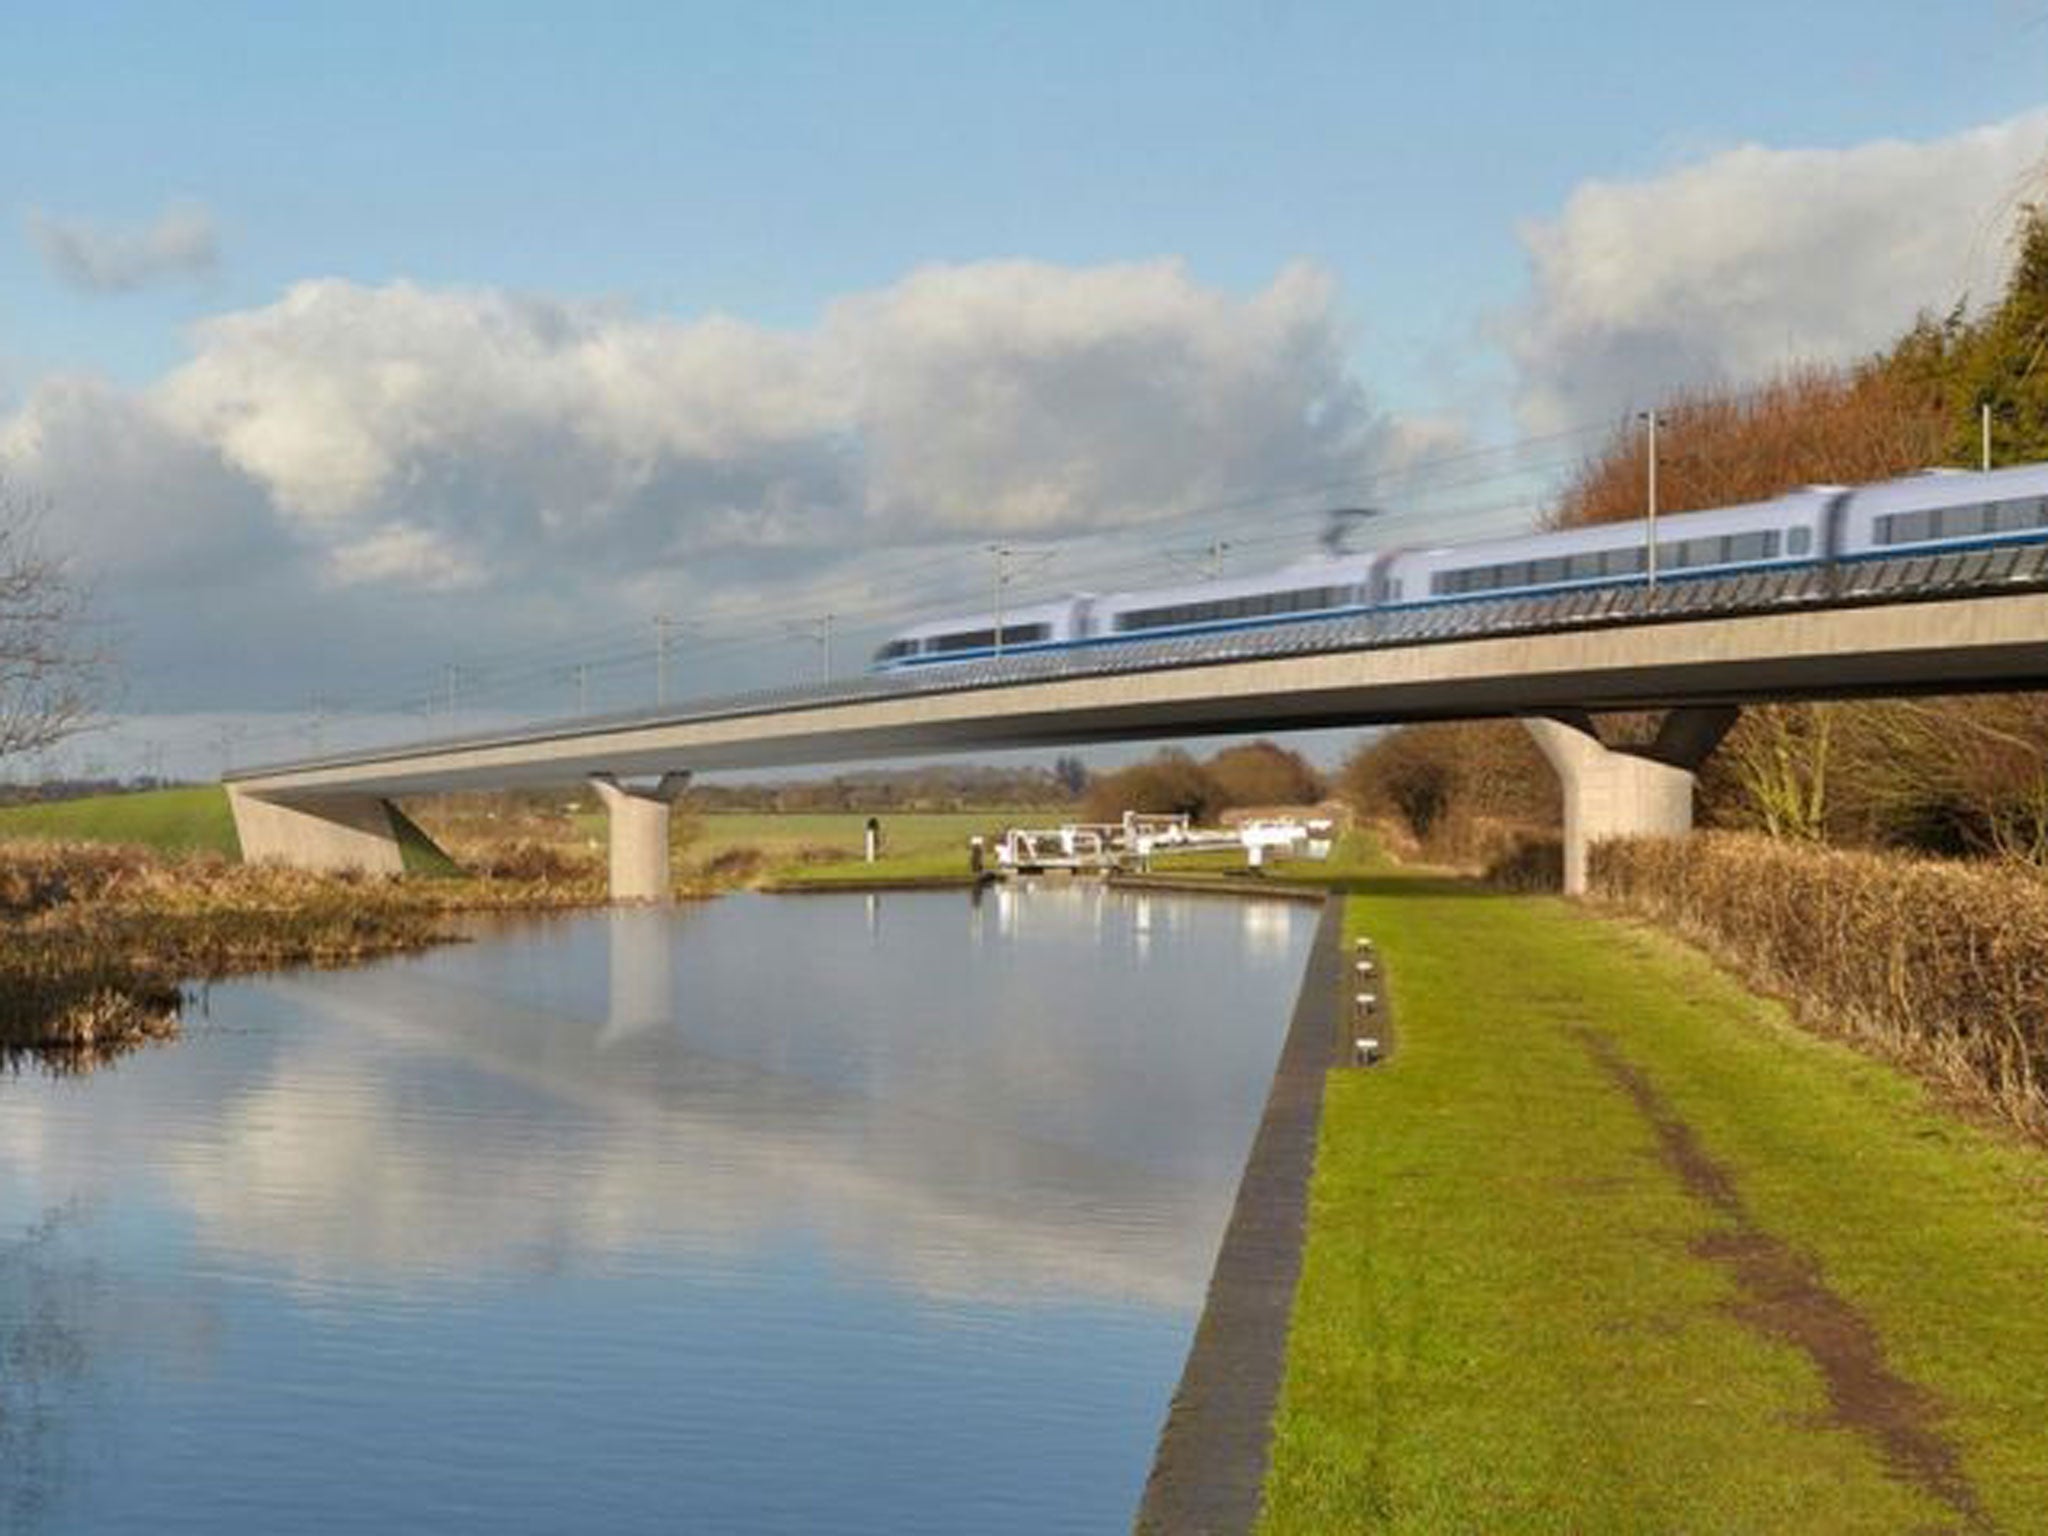 Image issued by HS2 of the Birmingham and Fazeley viaduct, part of the new proposed route for the HS2 high speed rail scheme